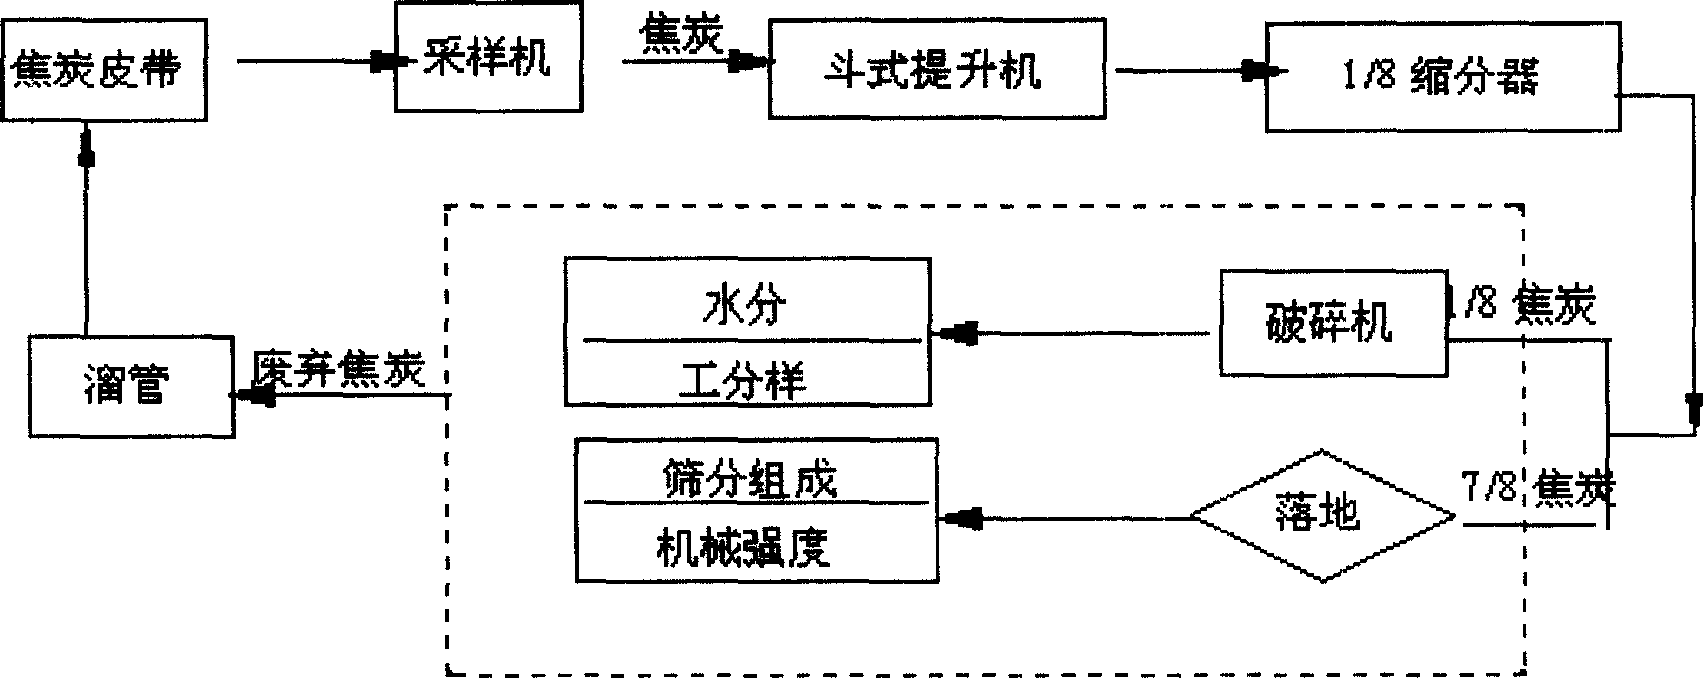 Coke automatic sample collecting and making method